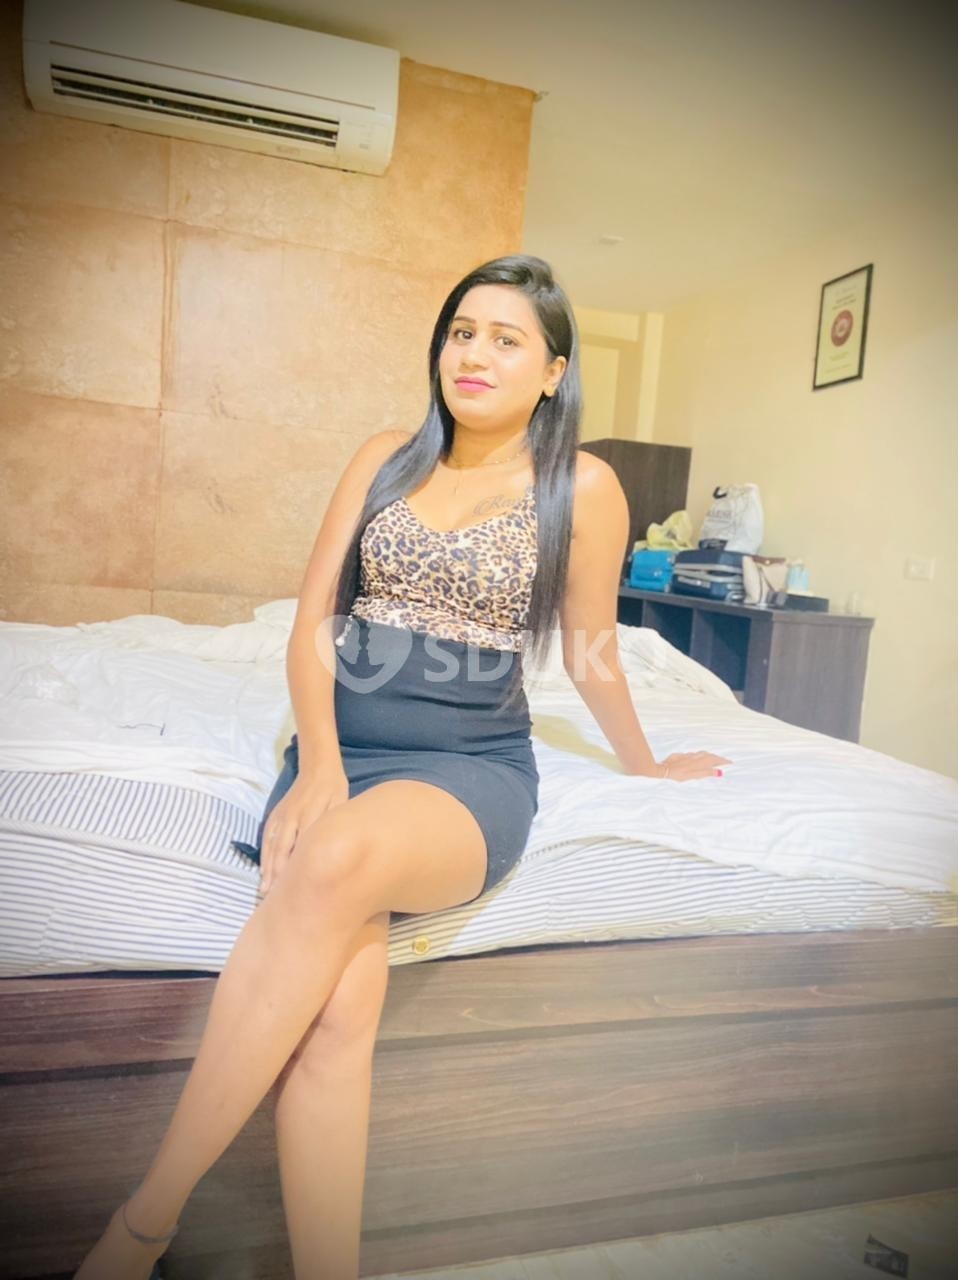 Hebbal . 100% Guaranteed full safe and secure Today low price College girl Now book and  Injoy service.